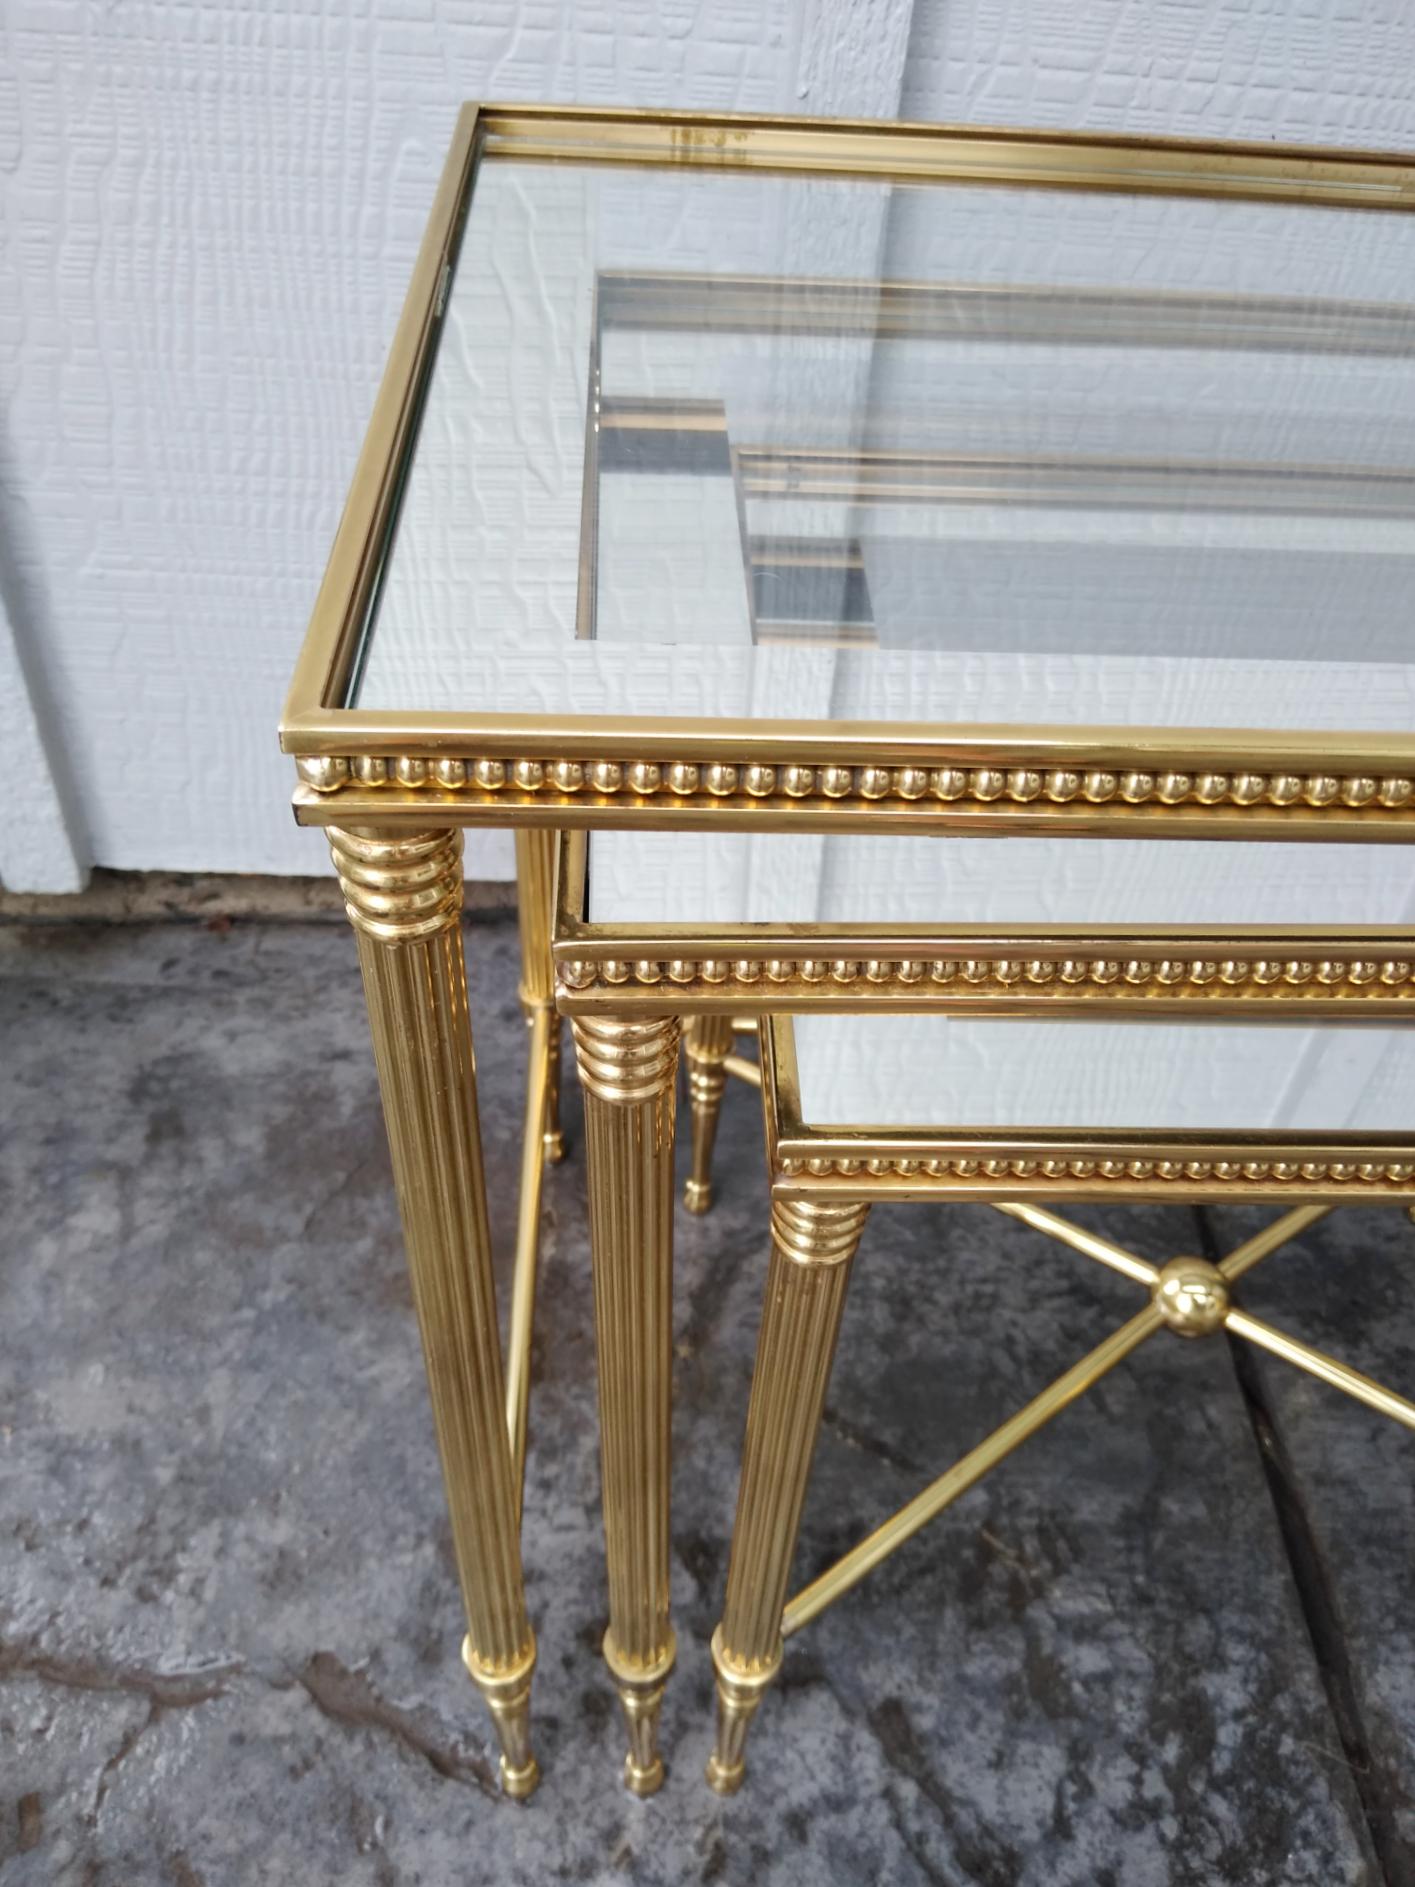 Fabulous set of brass nesting tables by Maison Jansen of France, circa 1960s.
These are exceptional solid brass tables with mirror trimmed glass top.
Condition is just about flawless, ready to place in your decor.